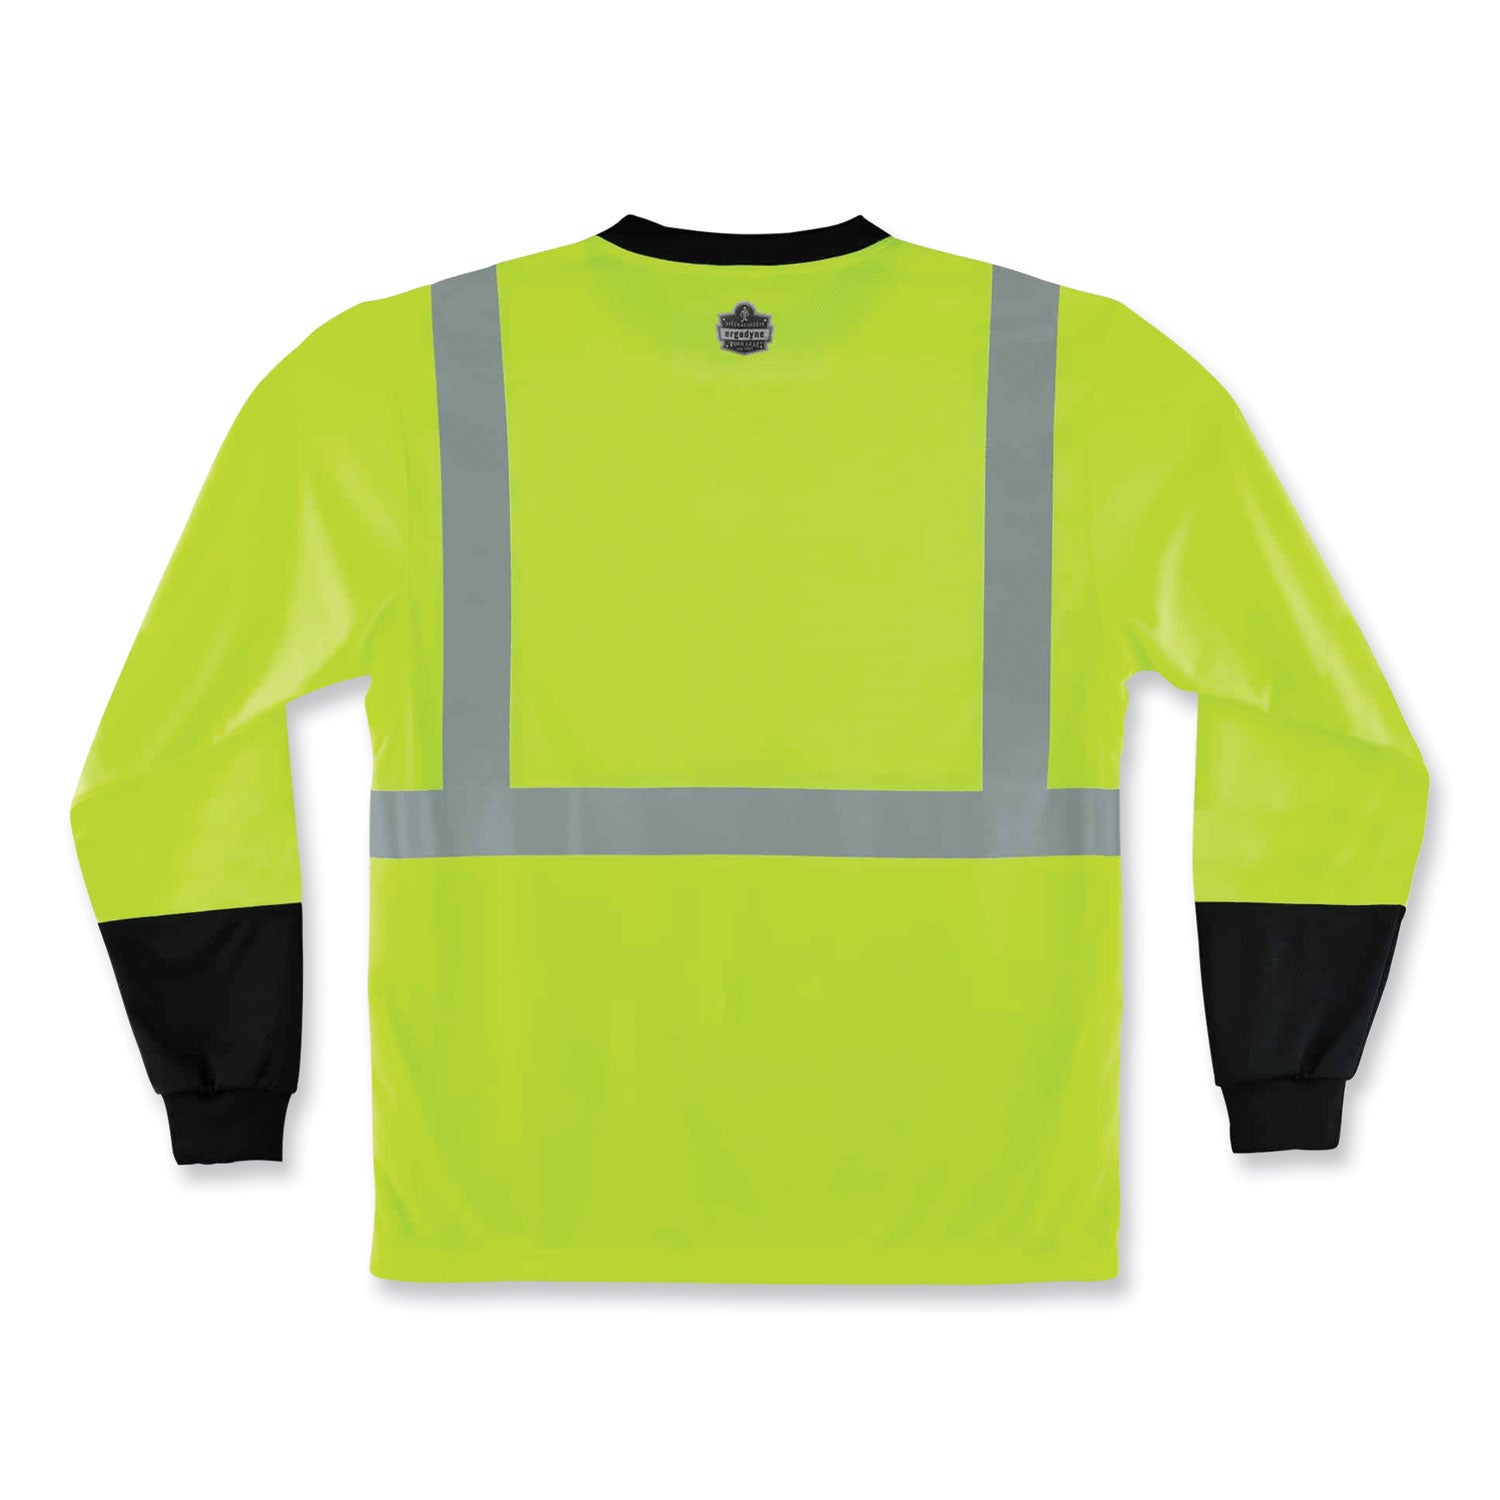 glowear-8291bk-type-r-class-2-black-front-long-sleeve-t-shirt-polyester-small-lime-ships-in-1-3-business-days_ego22702 - 2